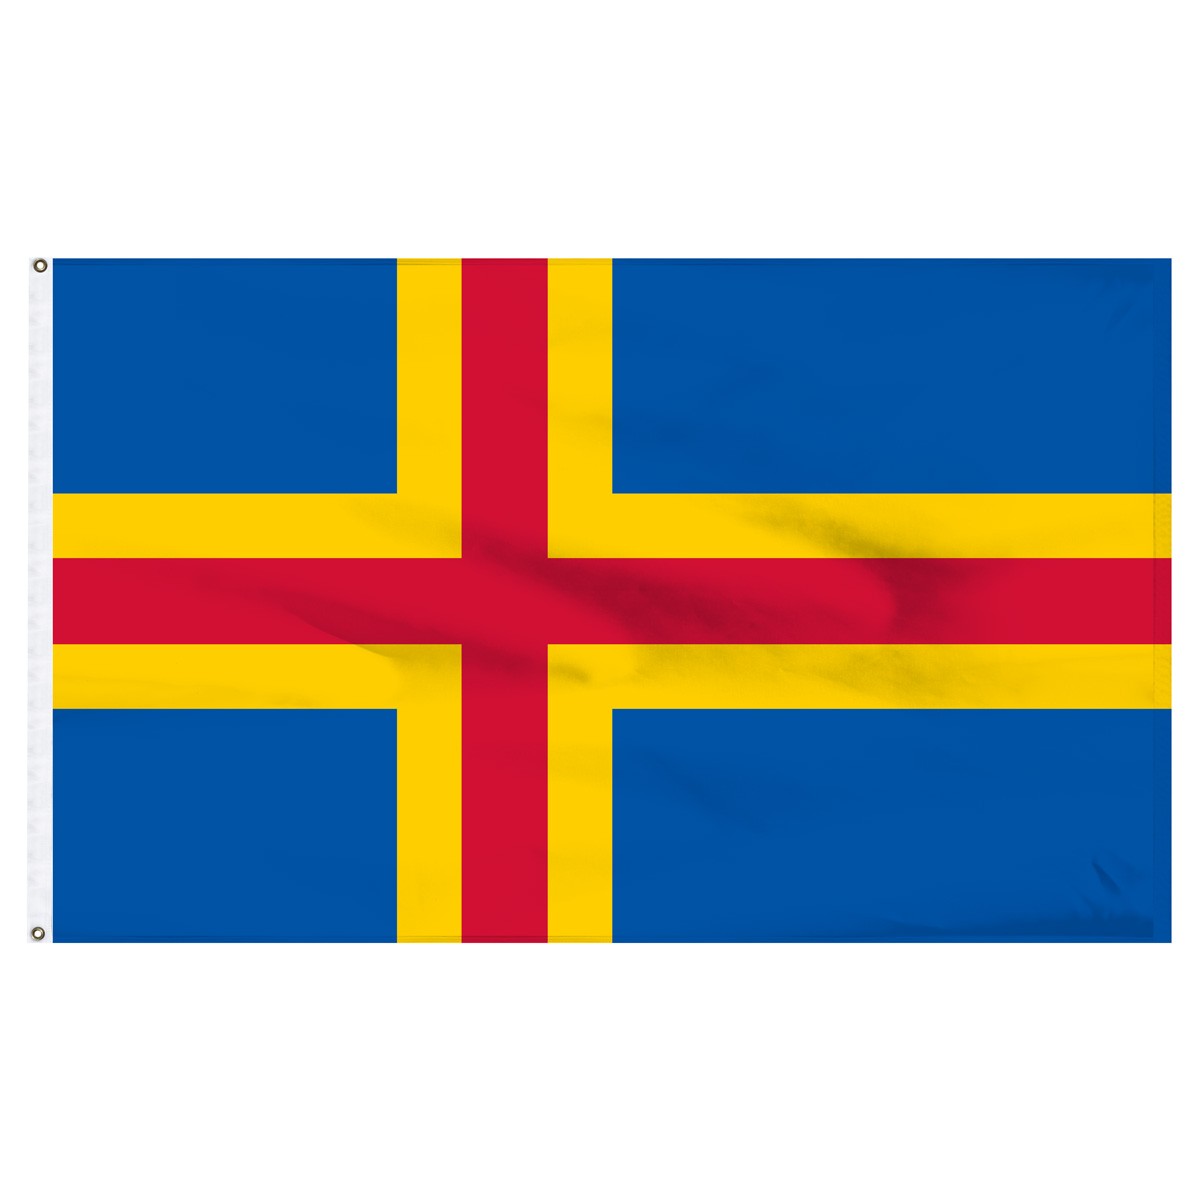 Aland Islands Triangle Flags and Pennants